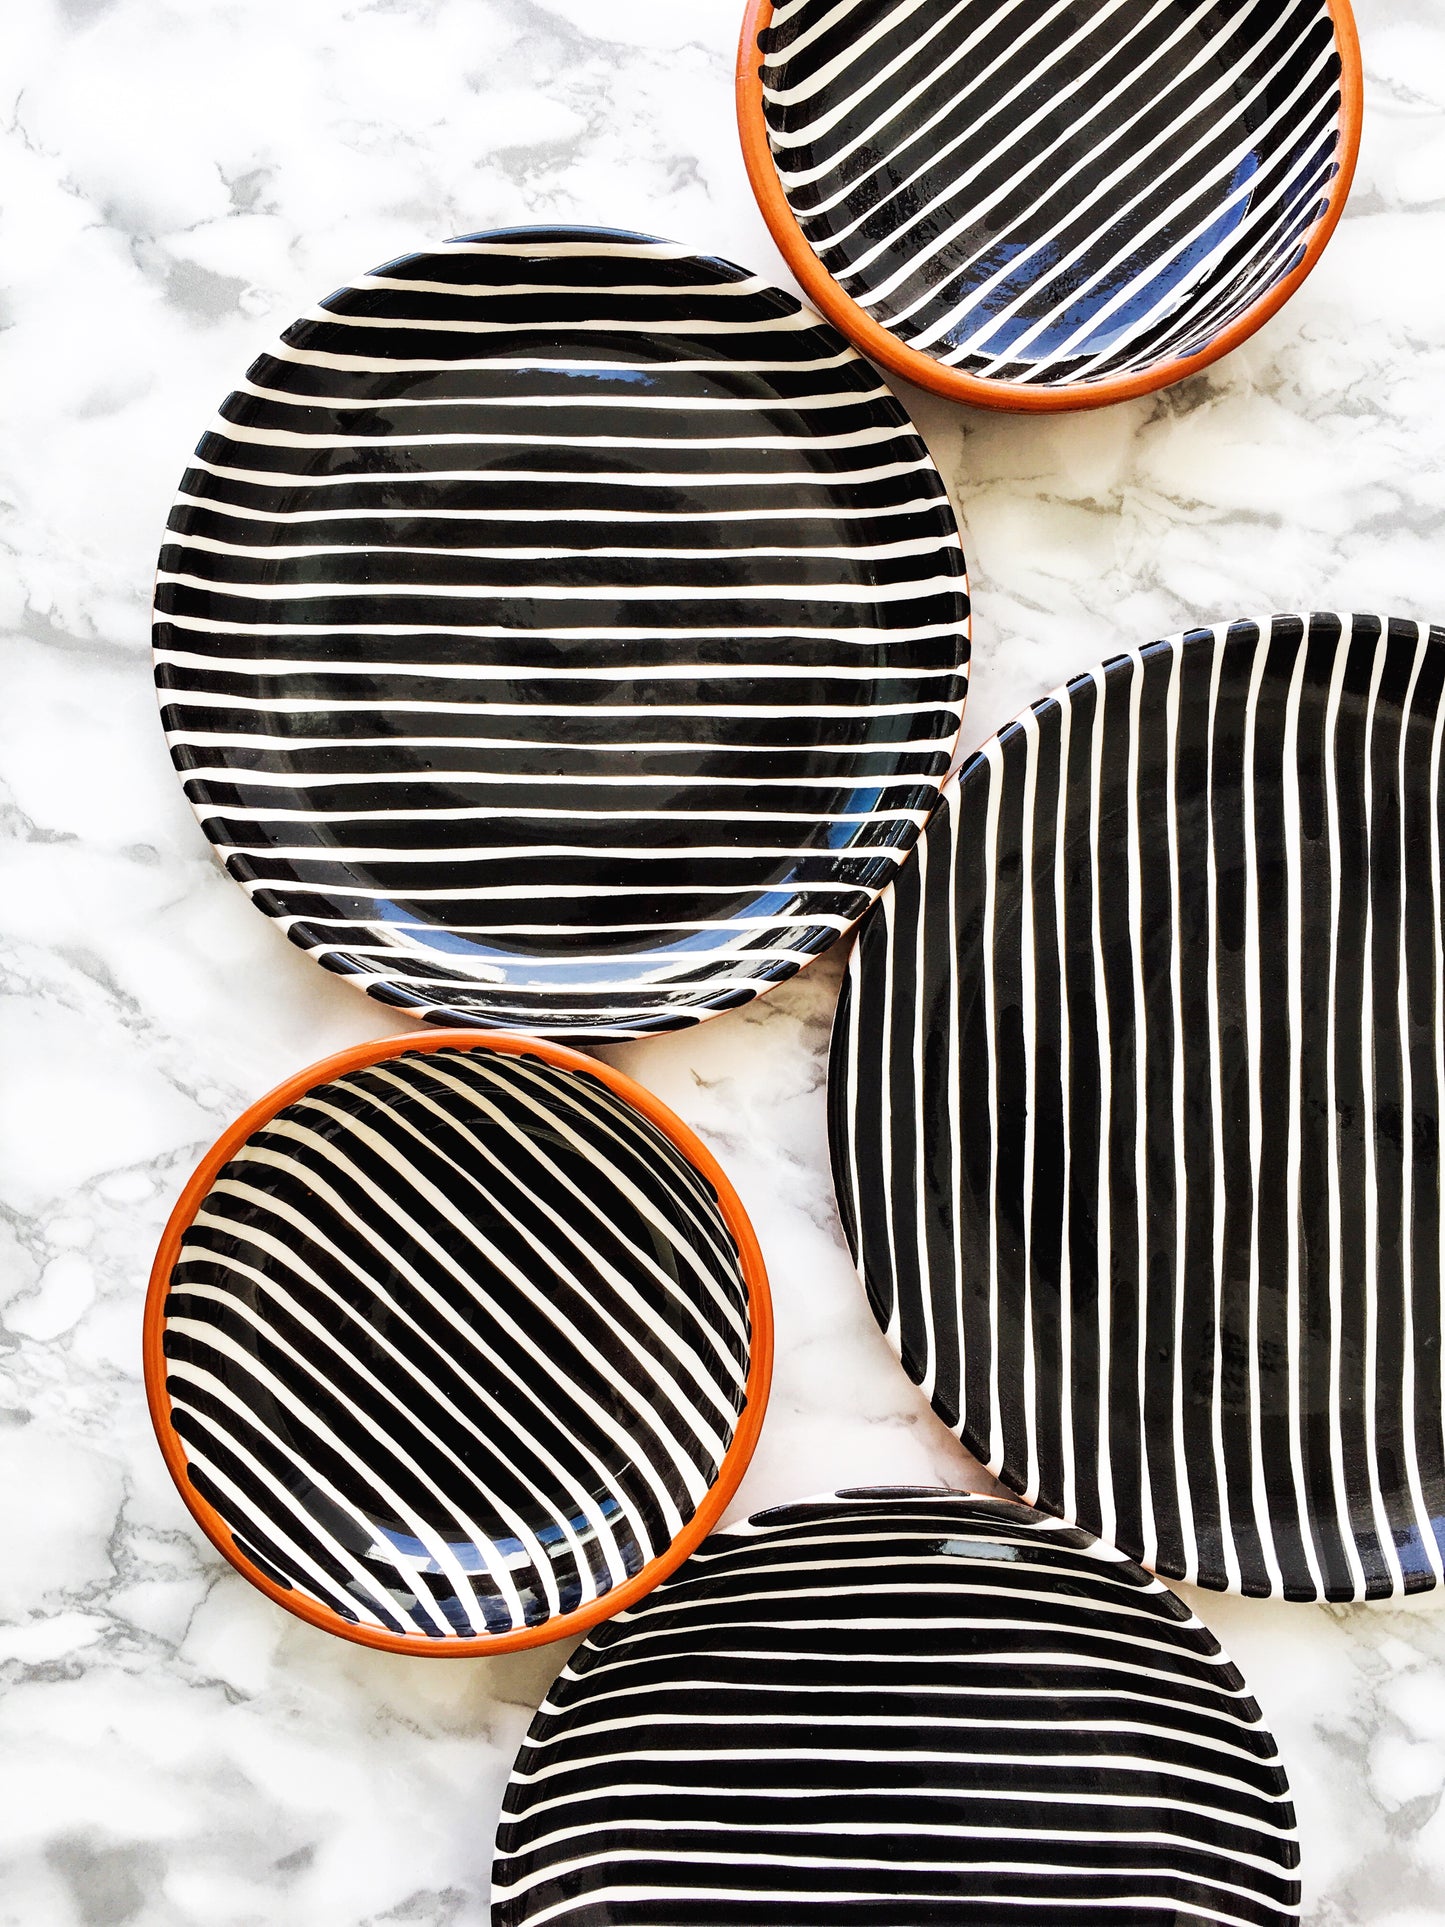 Stripe pattern dinner plate, salad plate, and bowl.